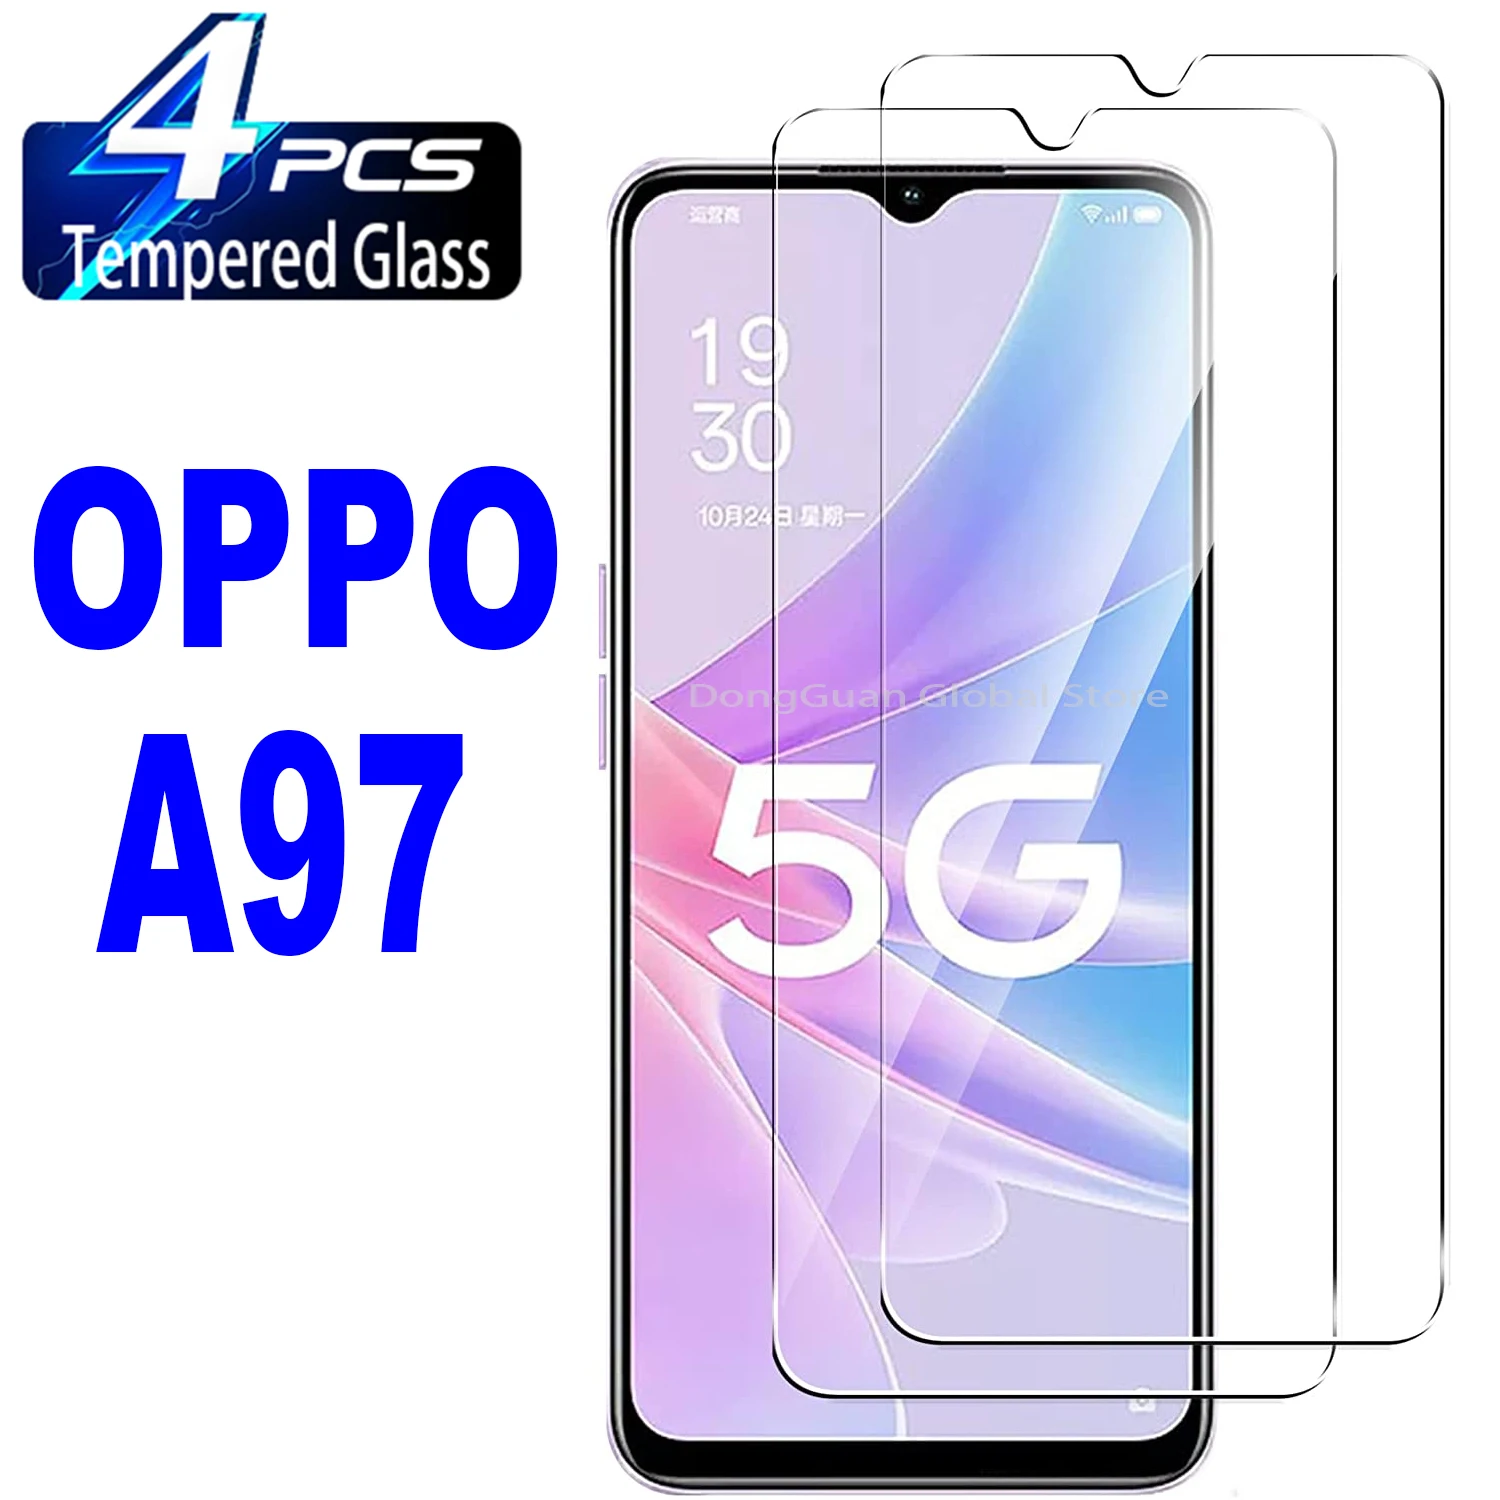 2/4Pcs Tempered Glass For OPPO A97 Screen Protector Glass Film